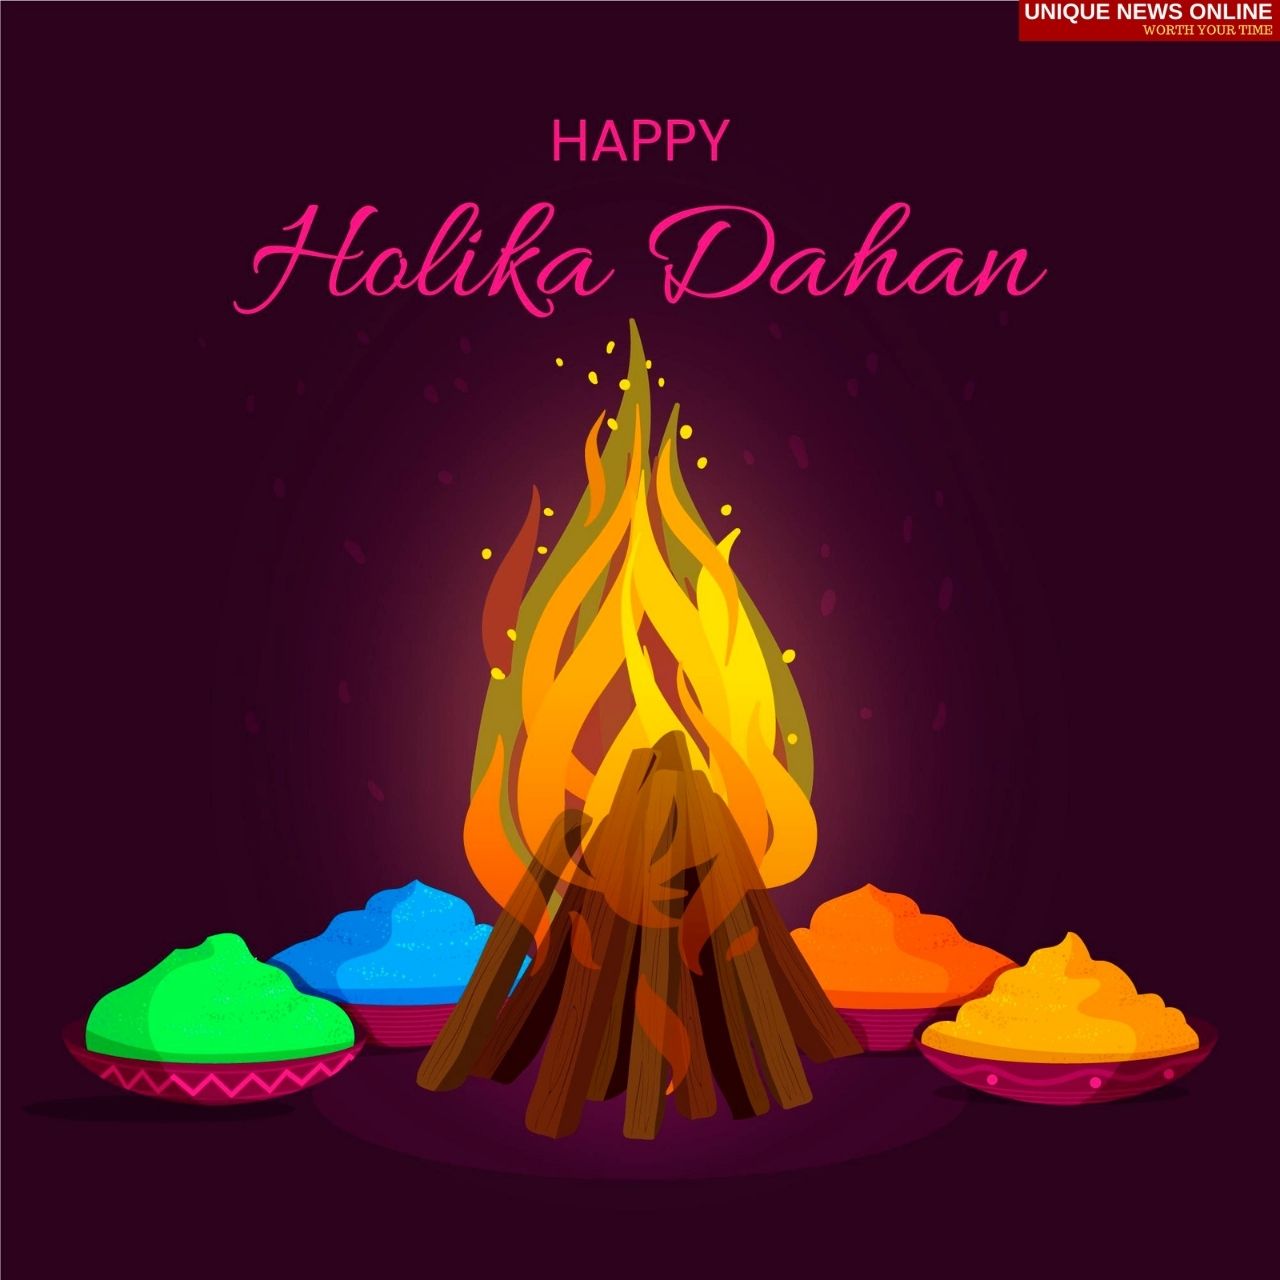 Happy Holika Dahan 2022 Instagram Captions، WhatsApp Stickers، Twitter Posts، Pinterest Images، and Reddit Quotes to Share